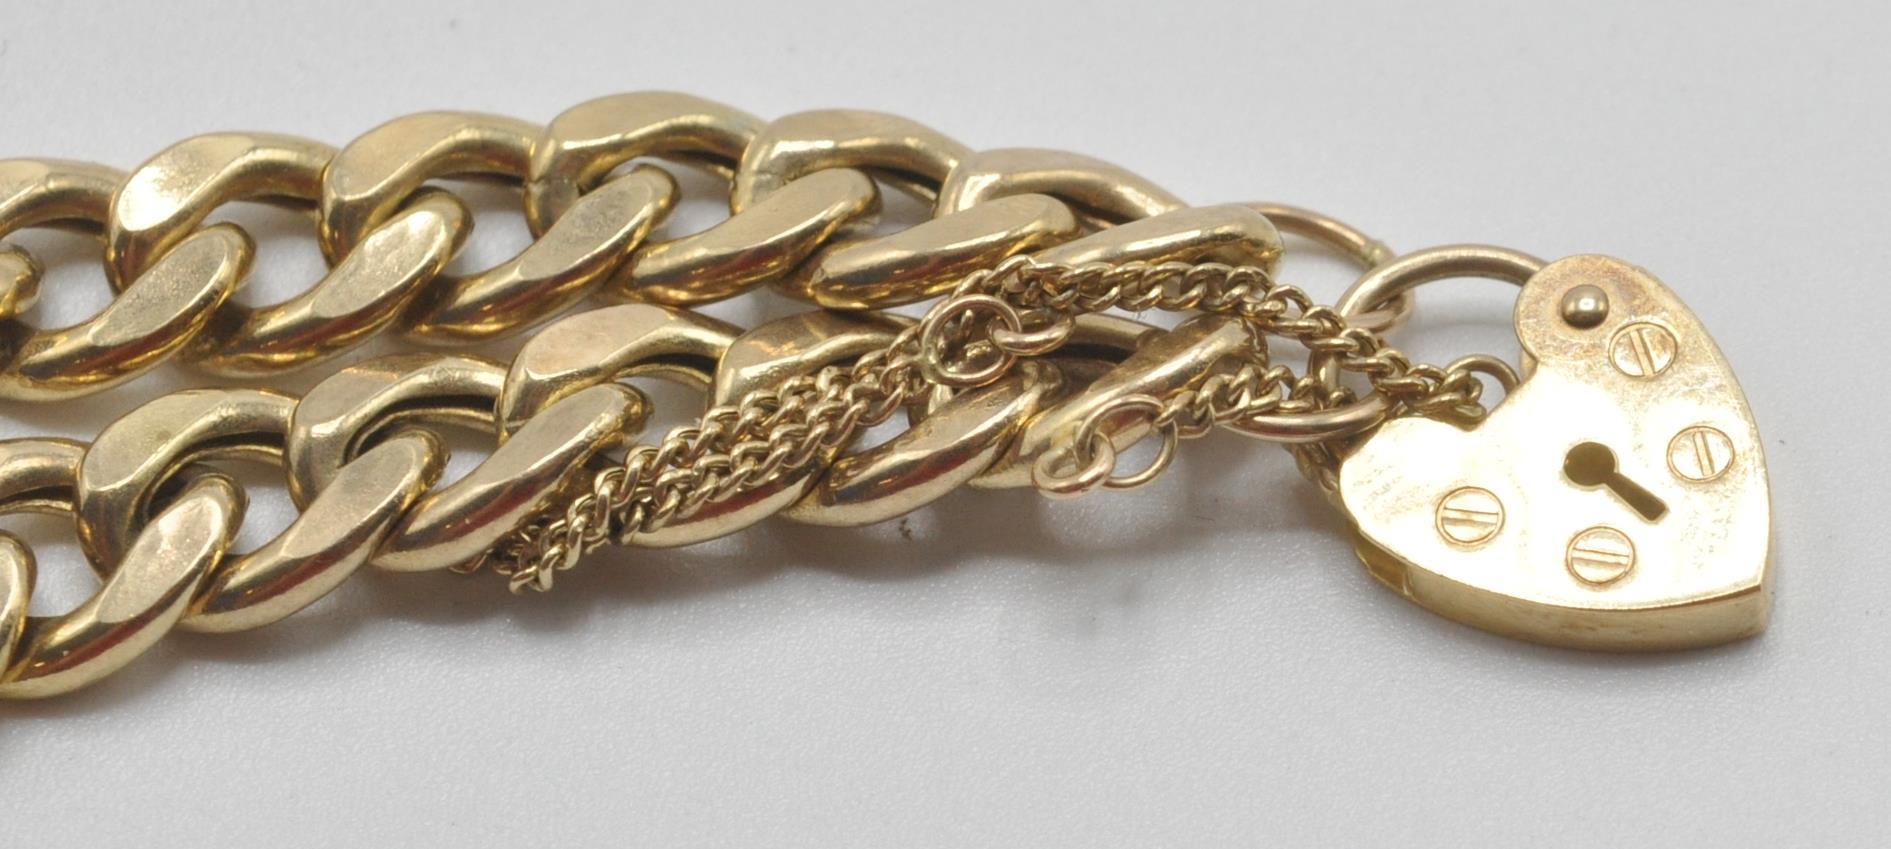 9CT YELLOW GOLD FLAT LINK BRACELET WITH A PADLOCK CLASP - Image 5 of 5